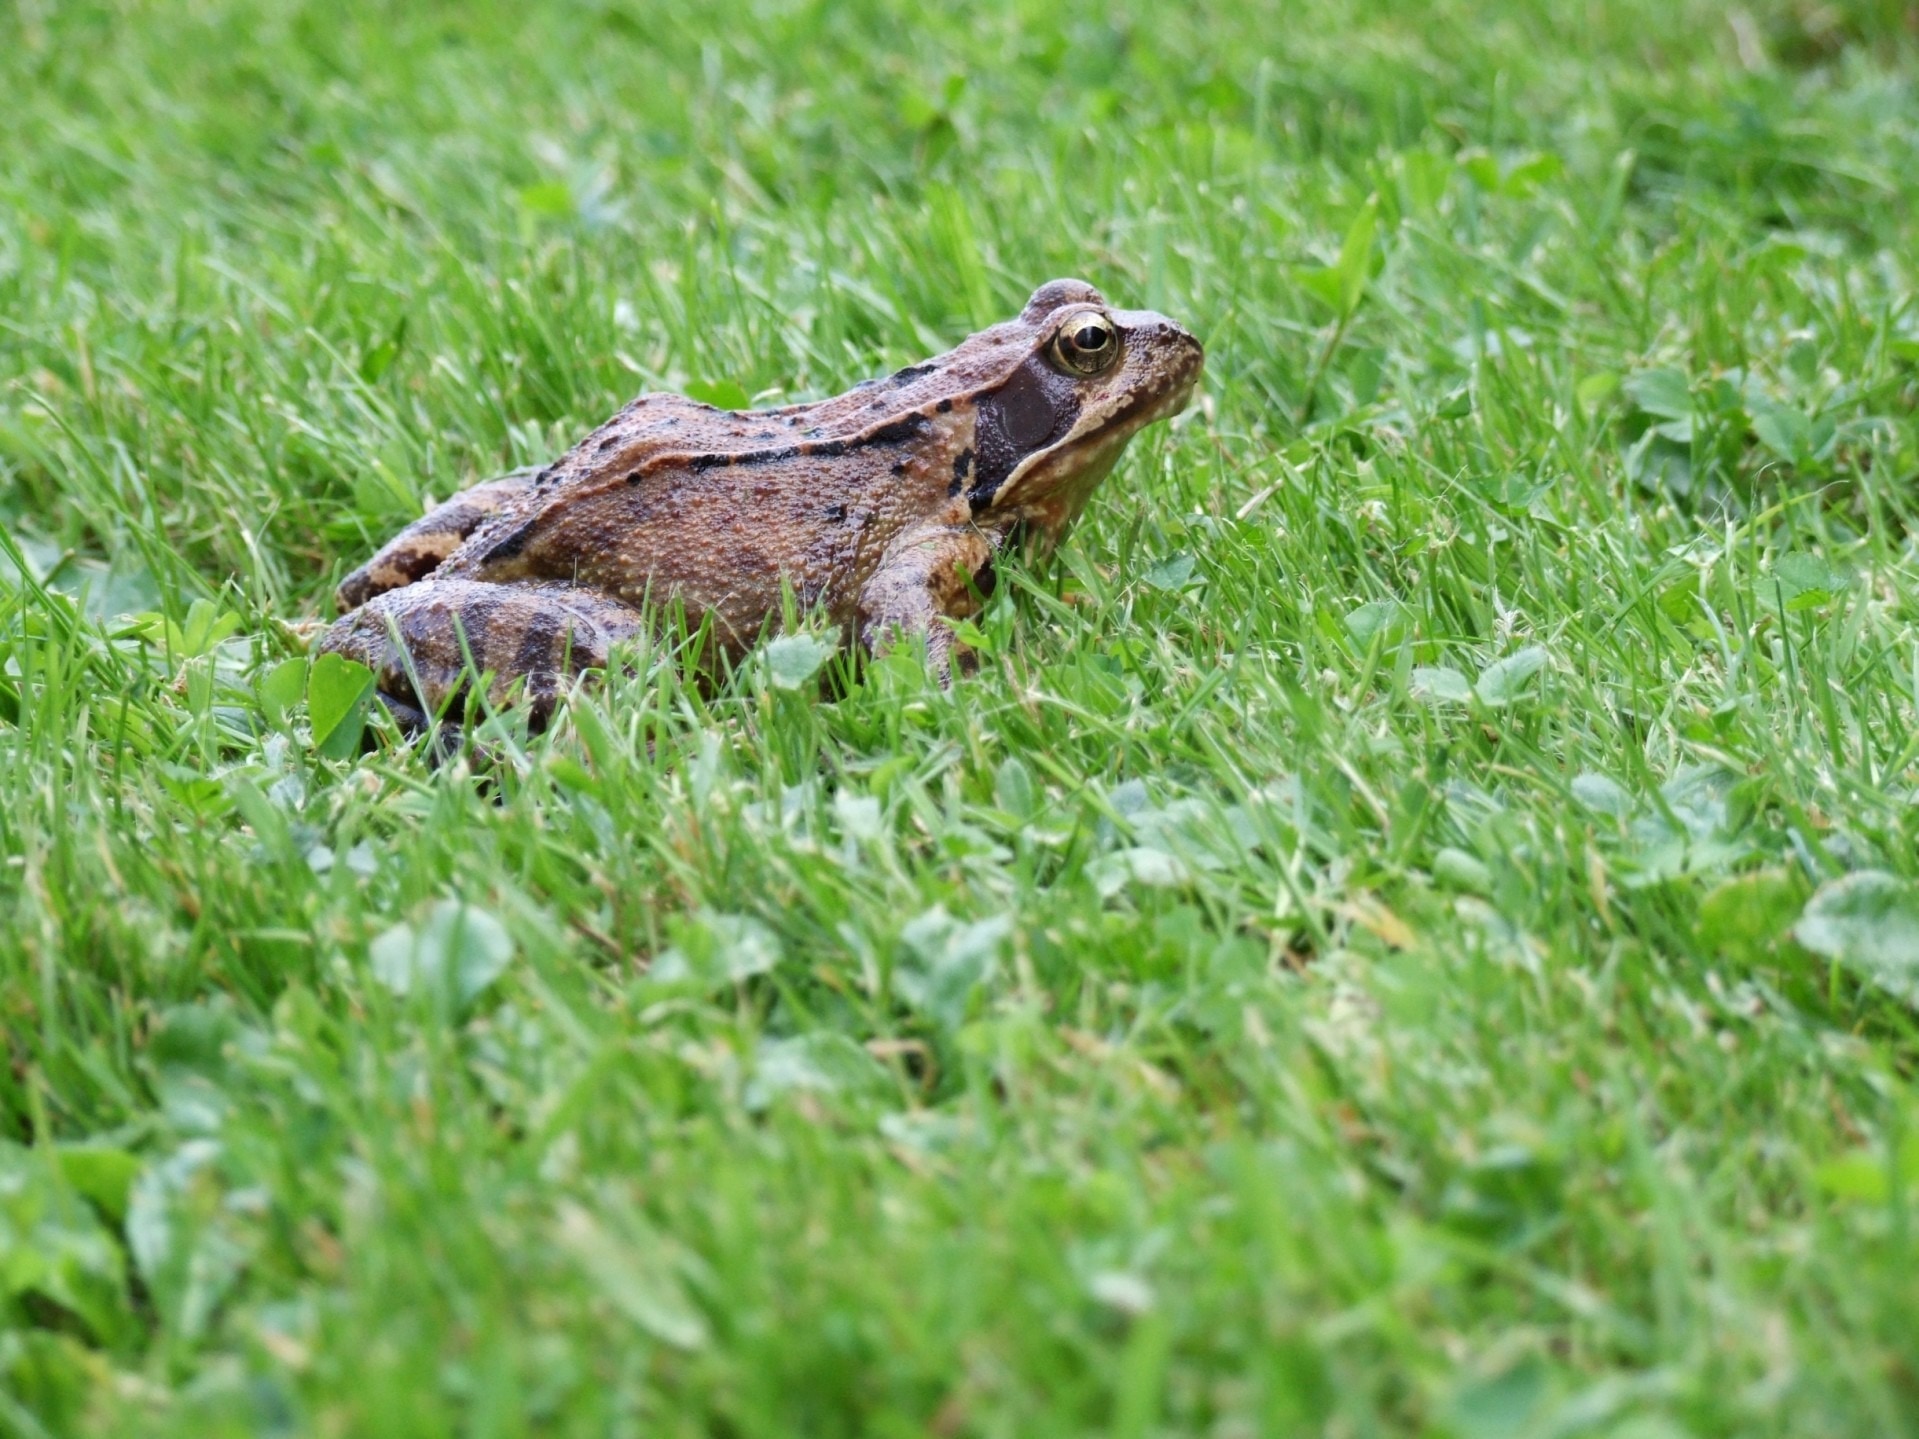 brown and black toad on grass